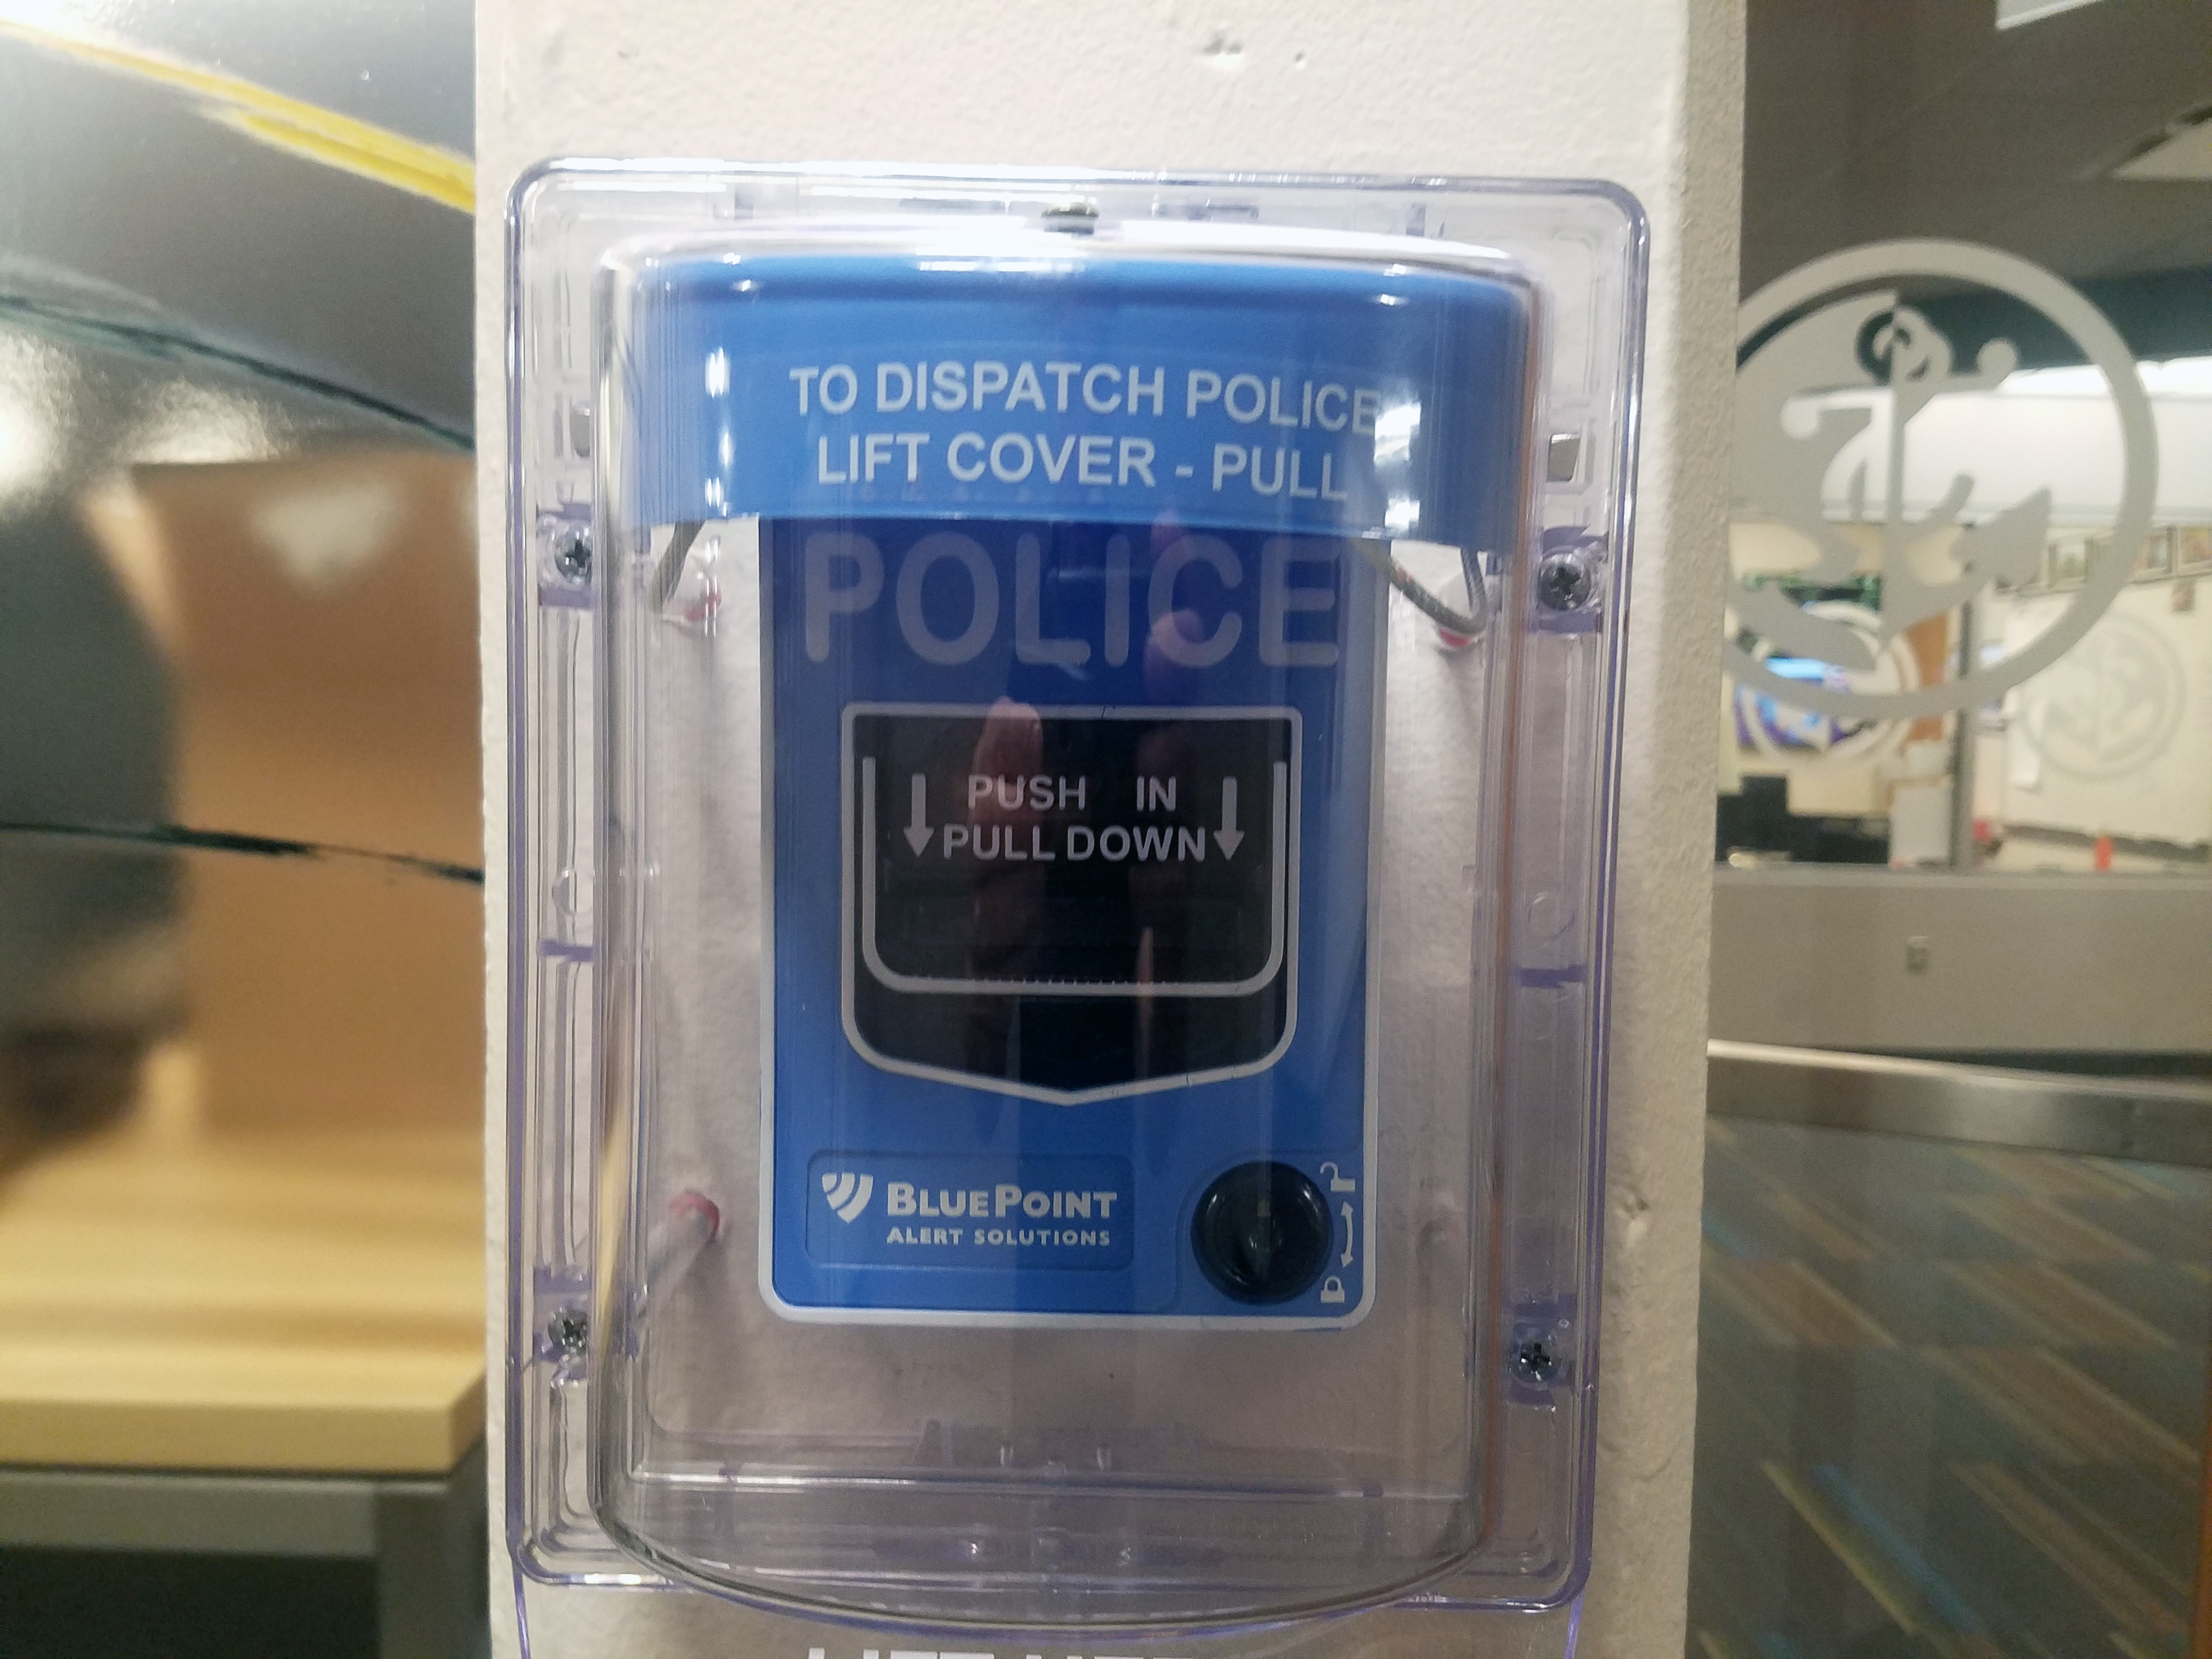 Along with active shooter drills, Glen Lake Community Schools in Michigan also installed police call boxes in classroom to boost school safety.